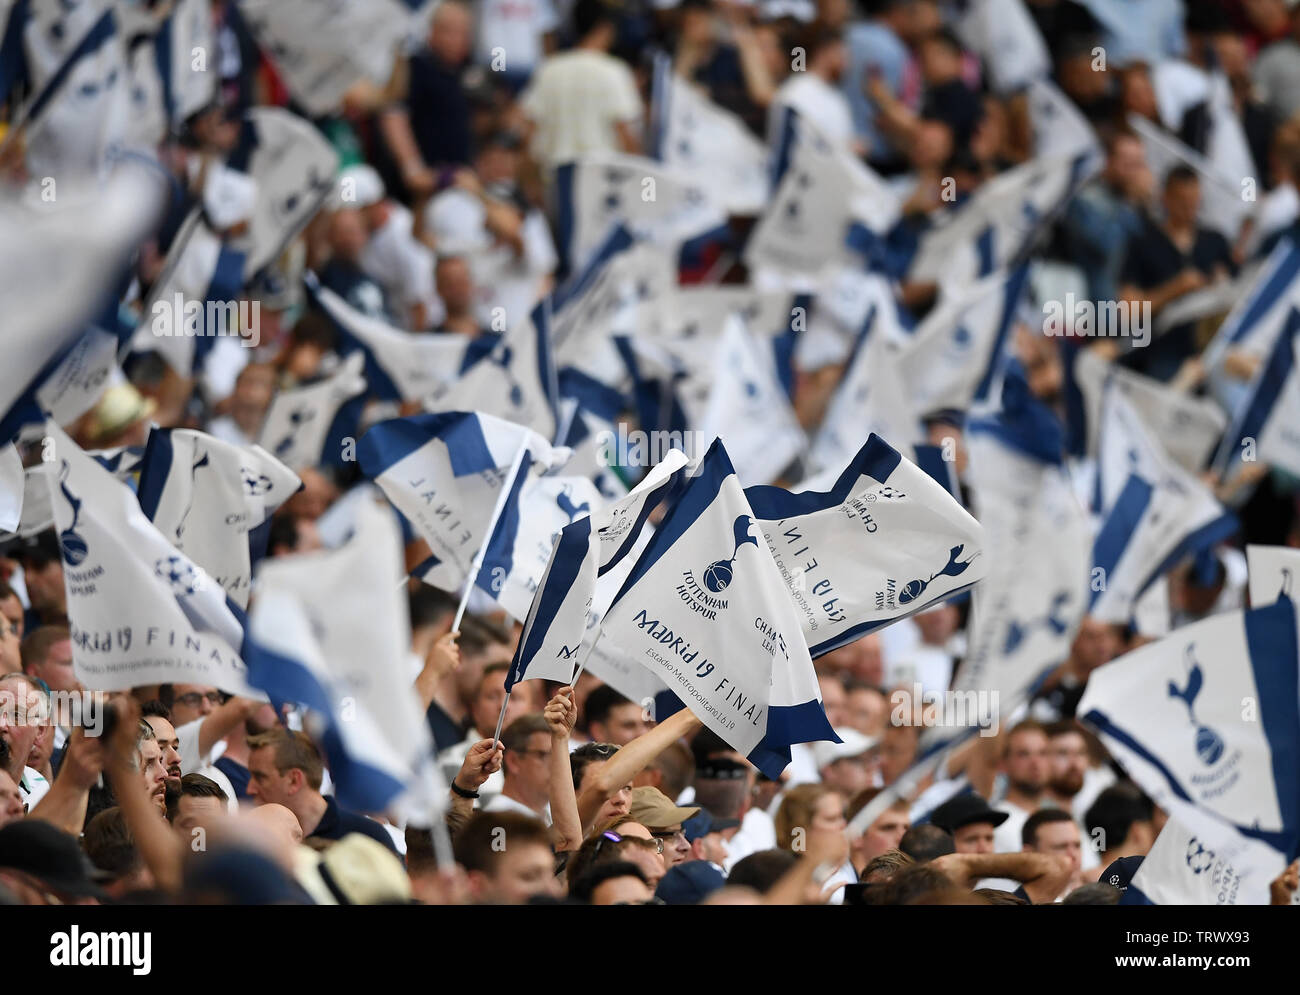 MADRID, SPAIN - JUNE 1, 2019: Tottenham fans pictured prior to the 2018/19 UEFA Champions League Final between Tottenham Hotspur (England) and Liverpool FC (England) at Wanda Metropolitano. Stock Photo